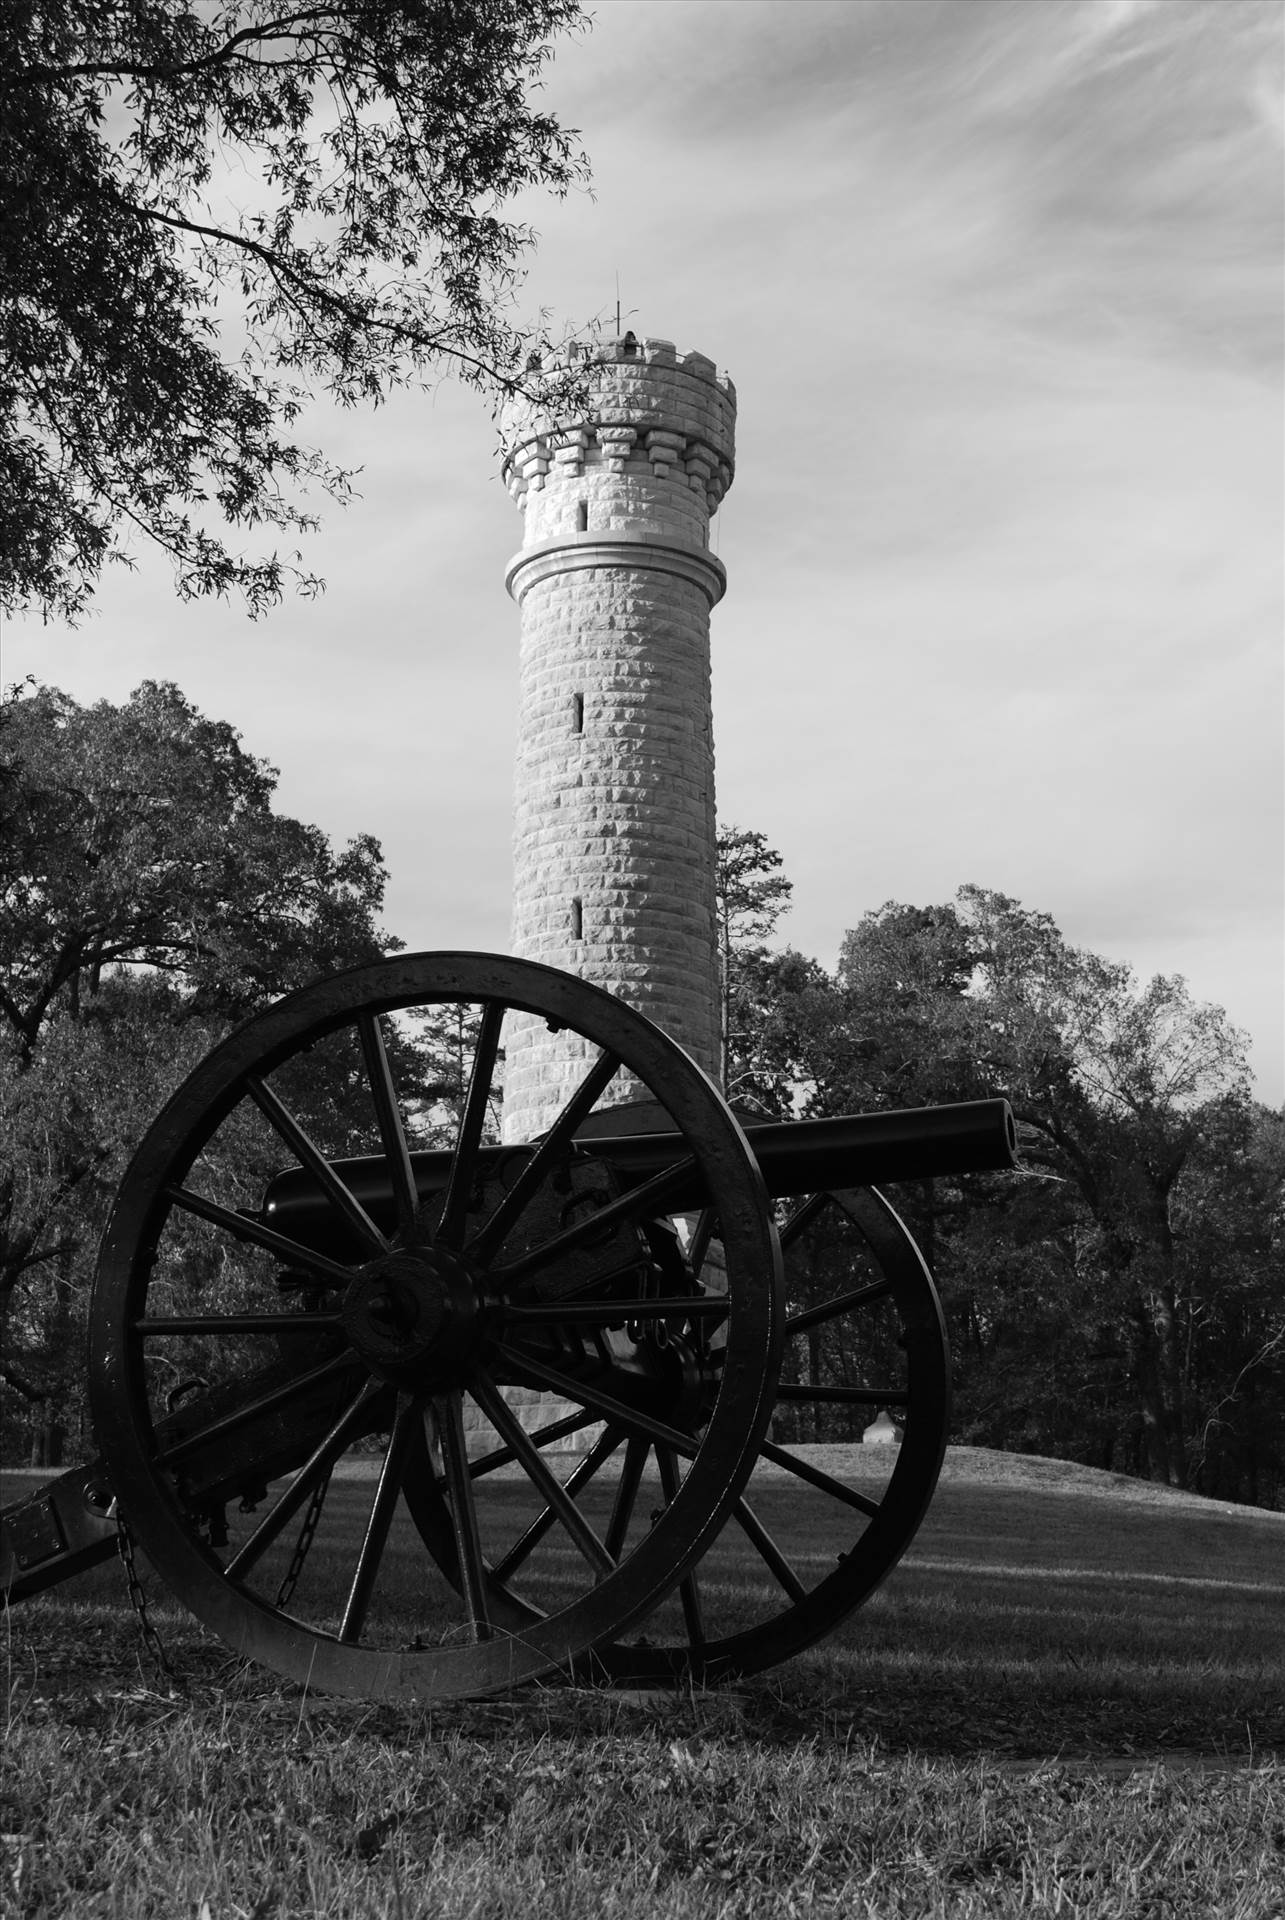 The Tower View of the tower in the Chickamauga Civil War Battlefield National Park in Georgia, USA by lwmcclure3